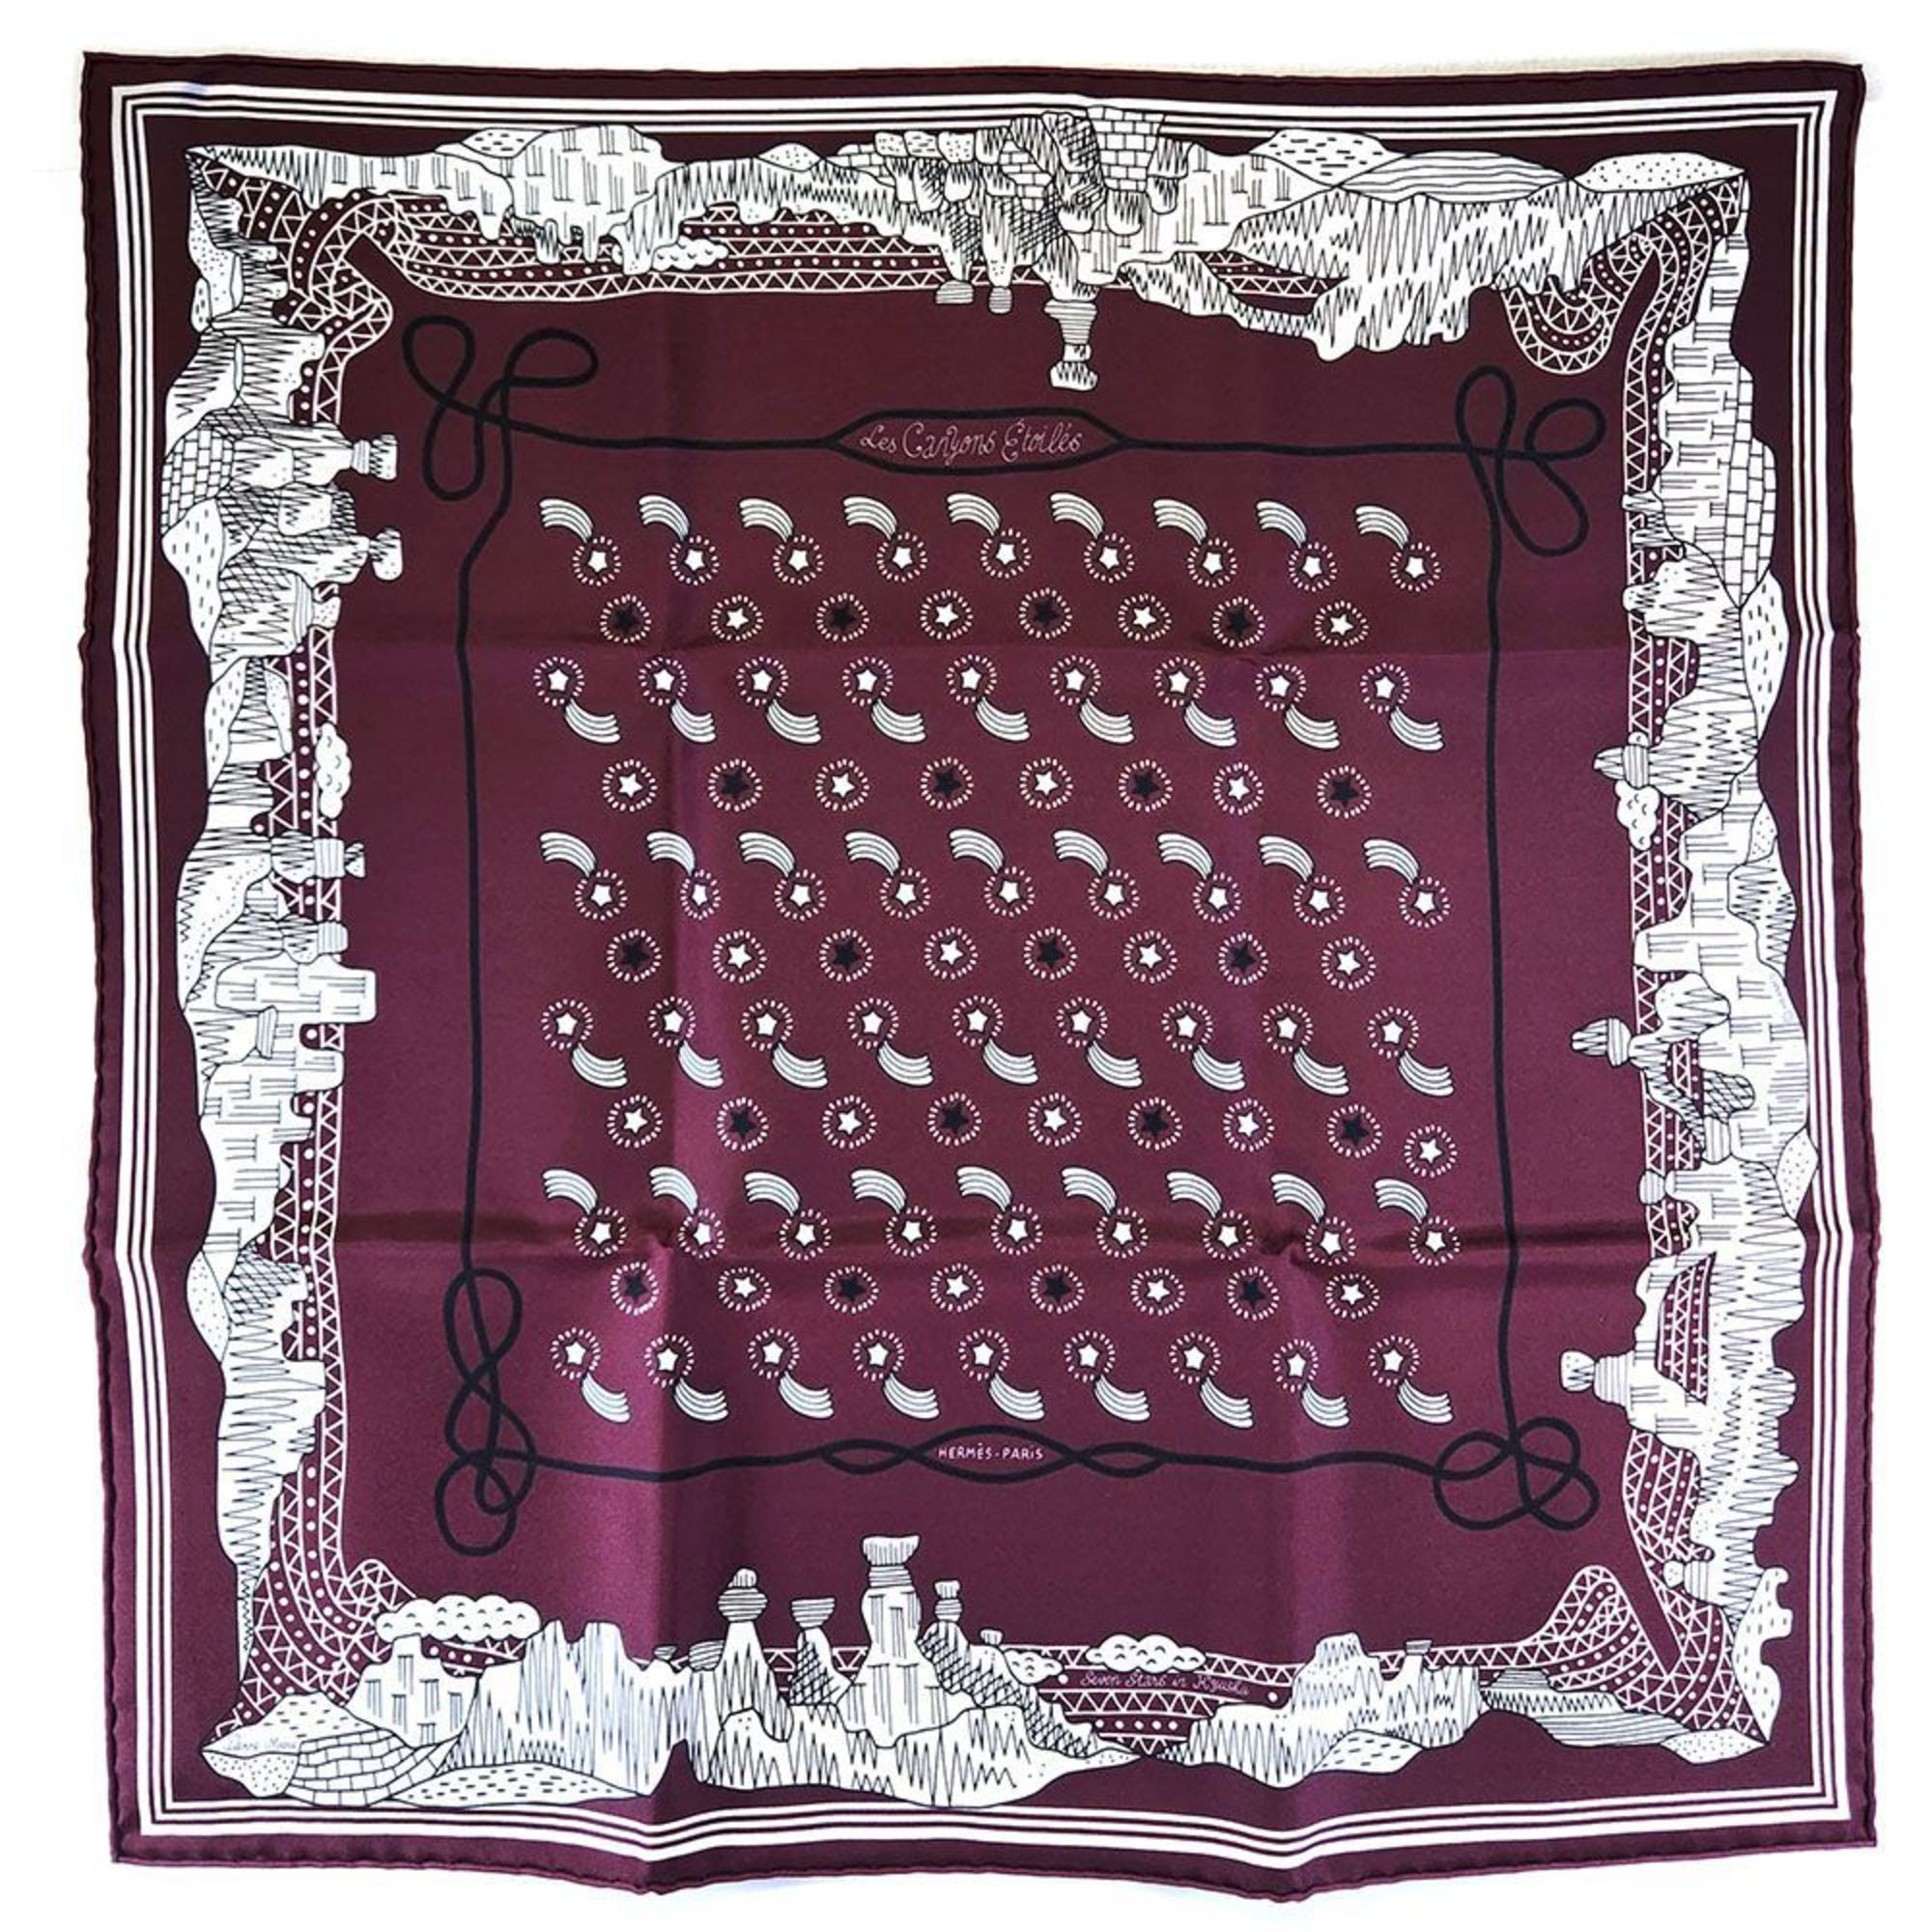 Hermes HERMES Scarf Carré 55 es Canyons Etoiles From the to Stars Cruise Train Limited Silk Women's Fashion